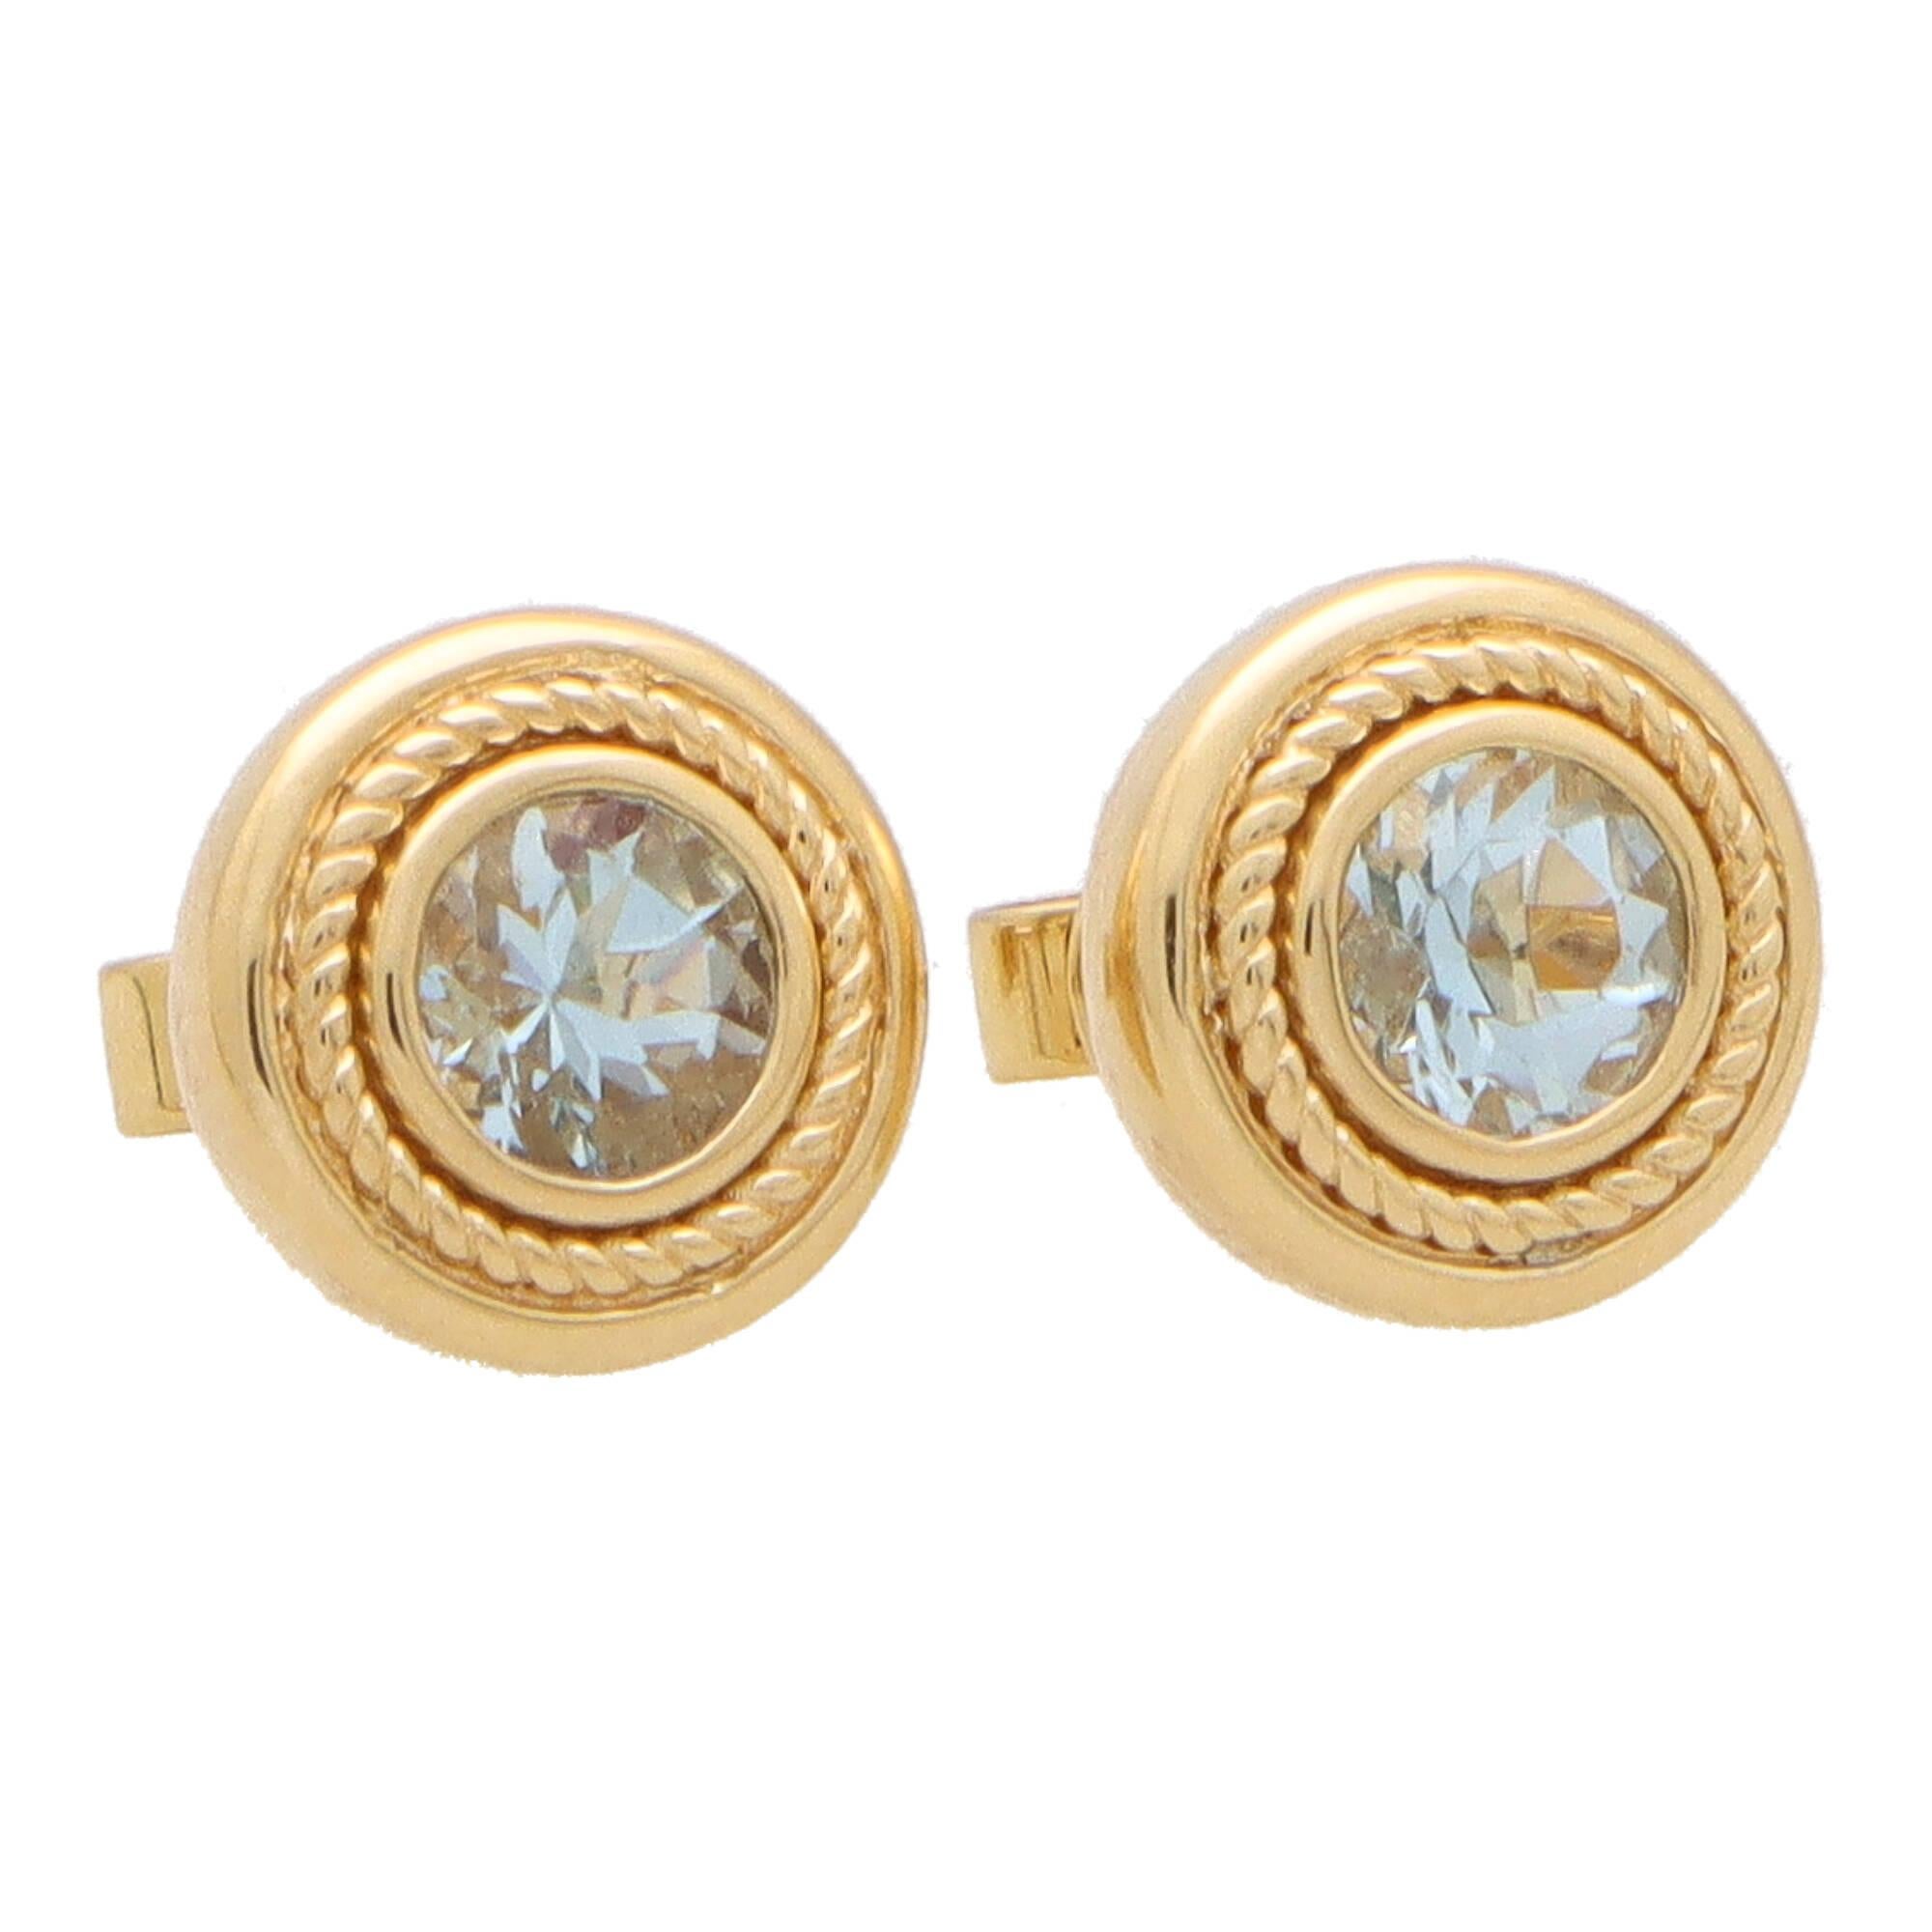 An incredibly stylish pair of Etruscan inspired aquamarine stud earrings set in 18k yellow gold.

Each earring is solely set with a 0.45 carat round cut light blue aquamarine which is securely set in a chunky yellow gold rub over setting. The edging